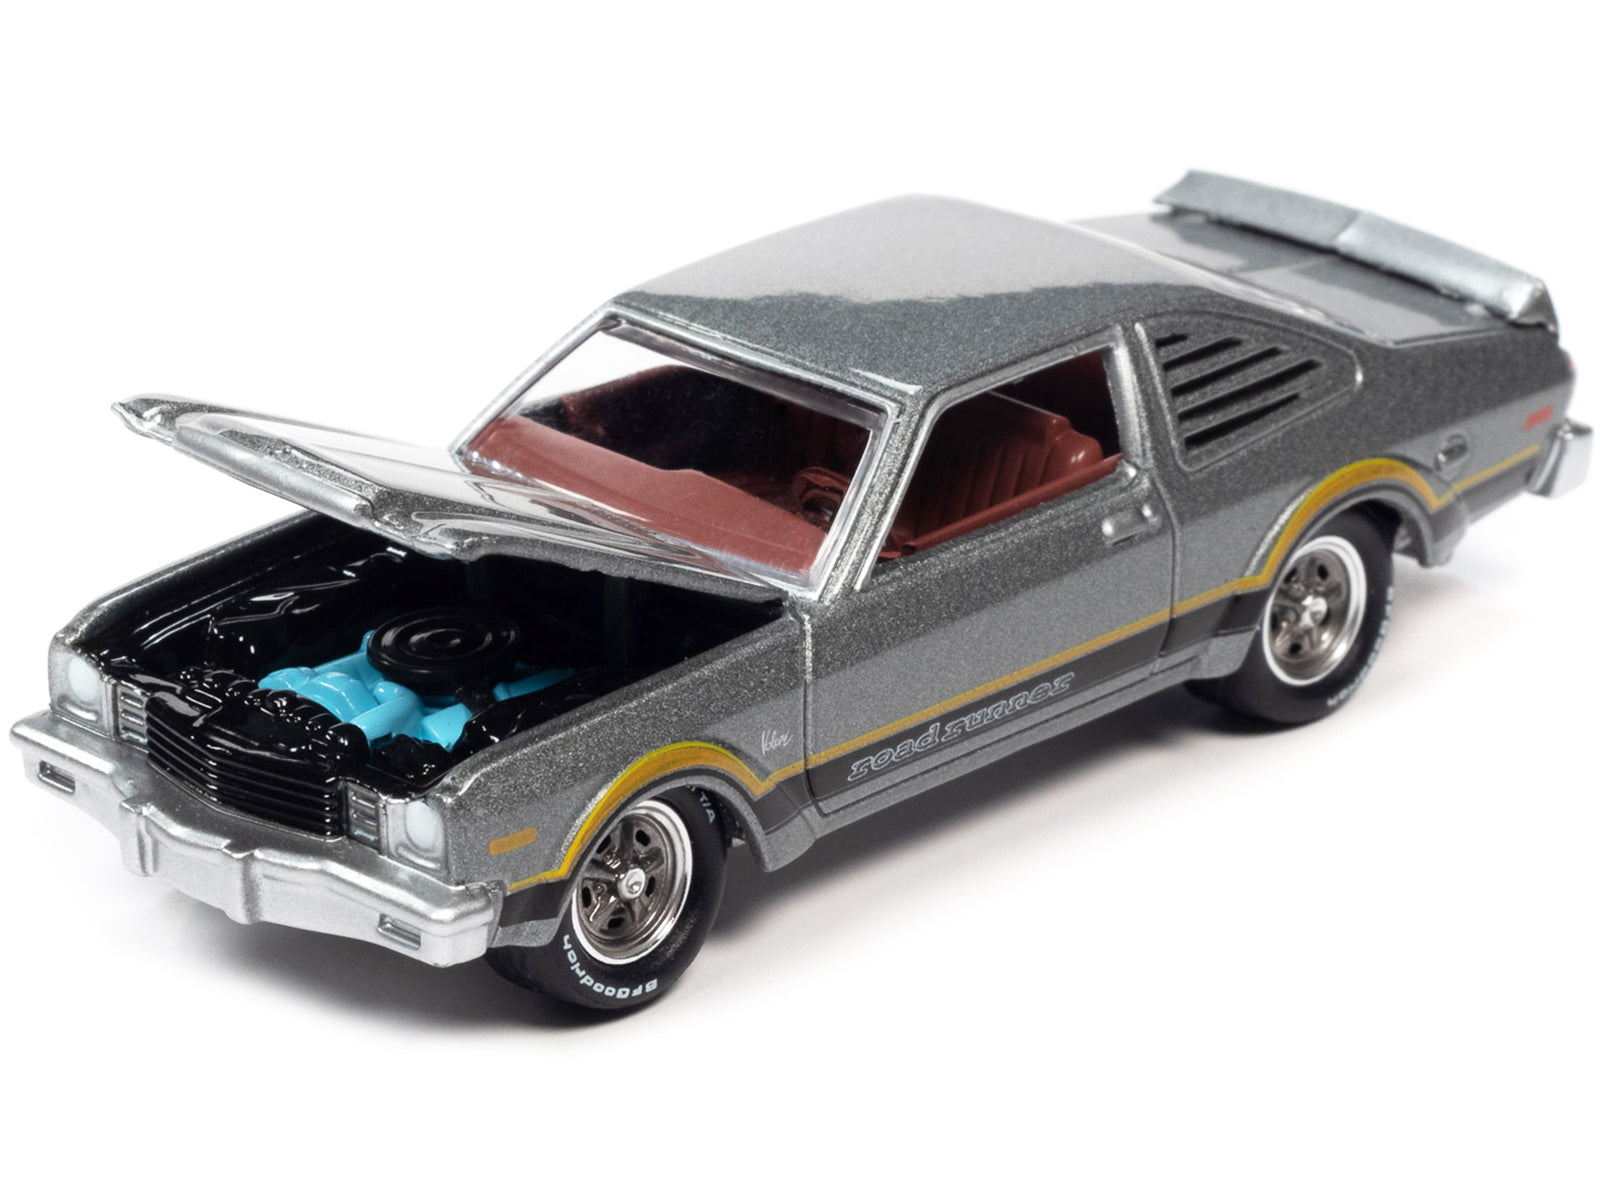 1976 Plymouth Volare Road Silver Diecast Model Car 